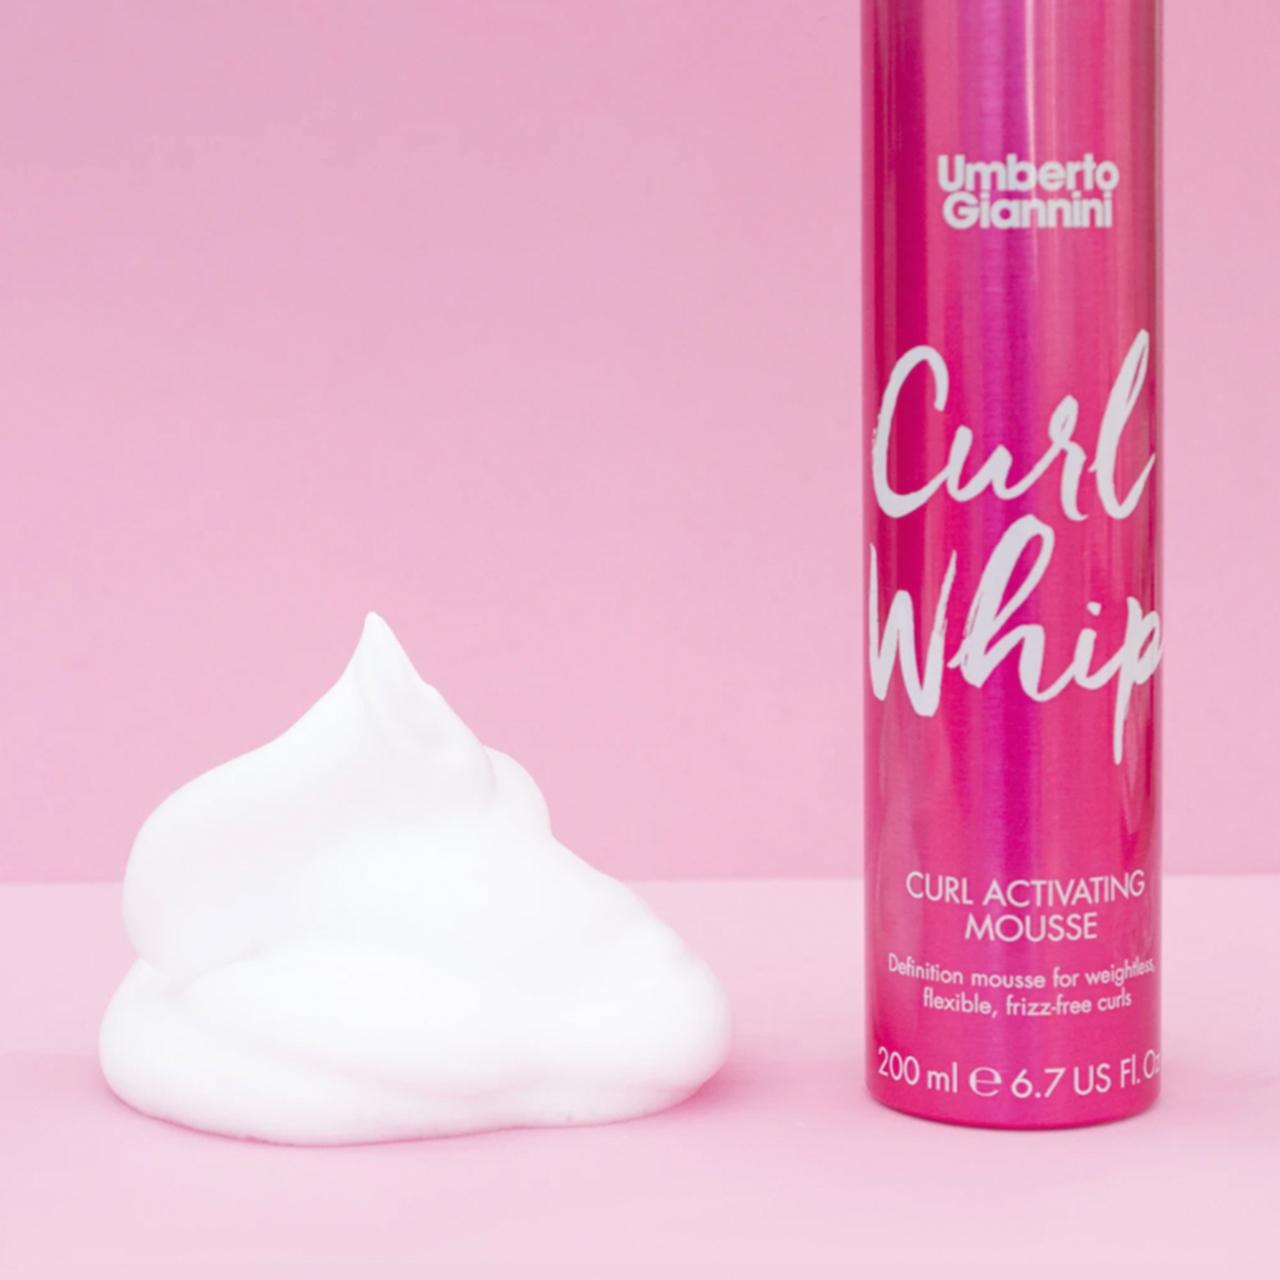 Umberto Giannini Curl Whip Curl Activating Mousse 200ml